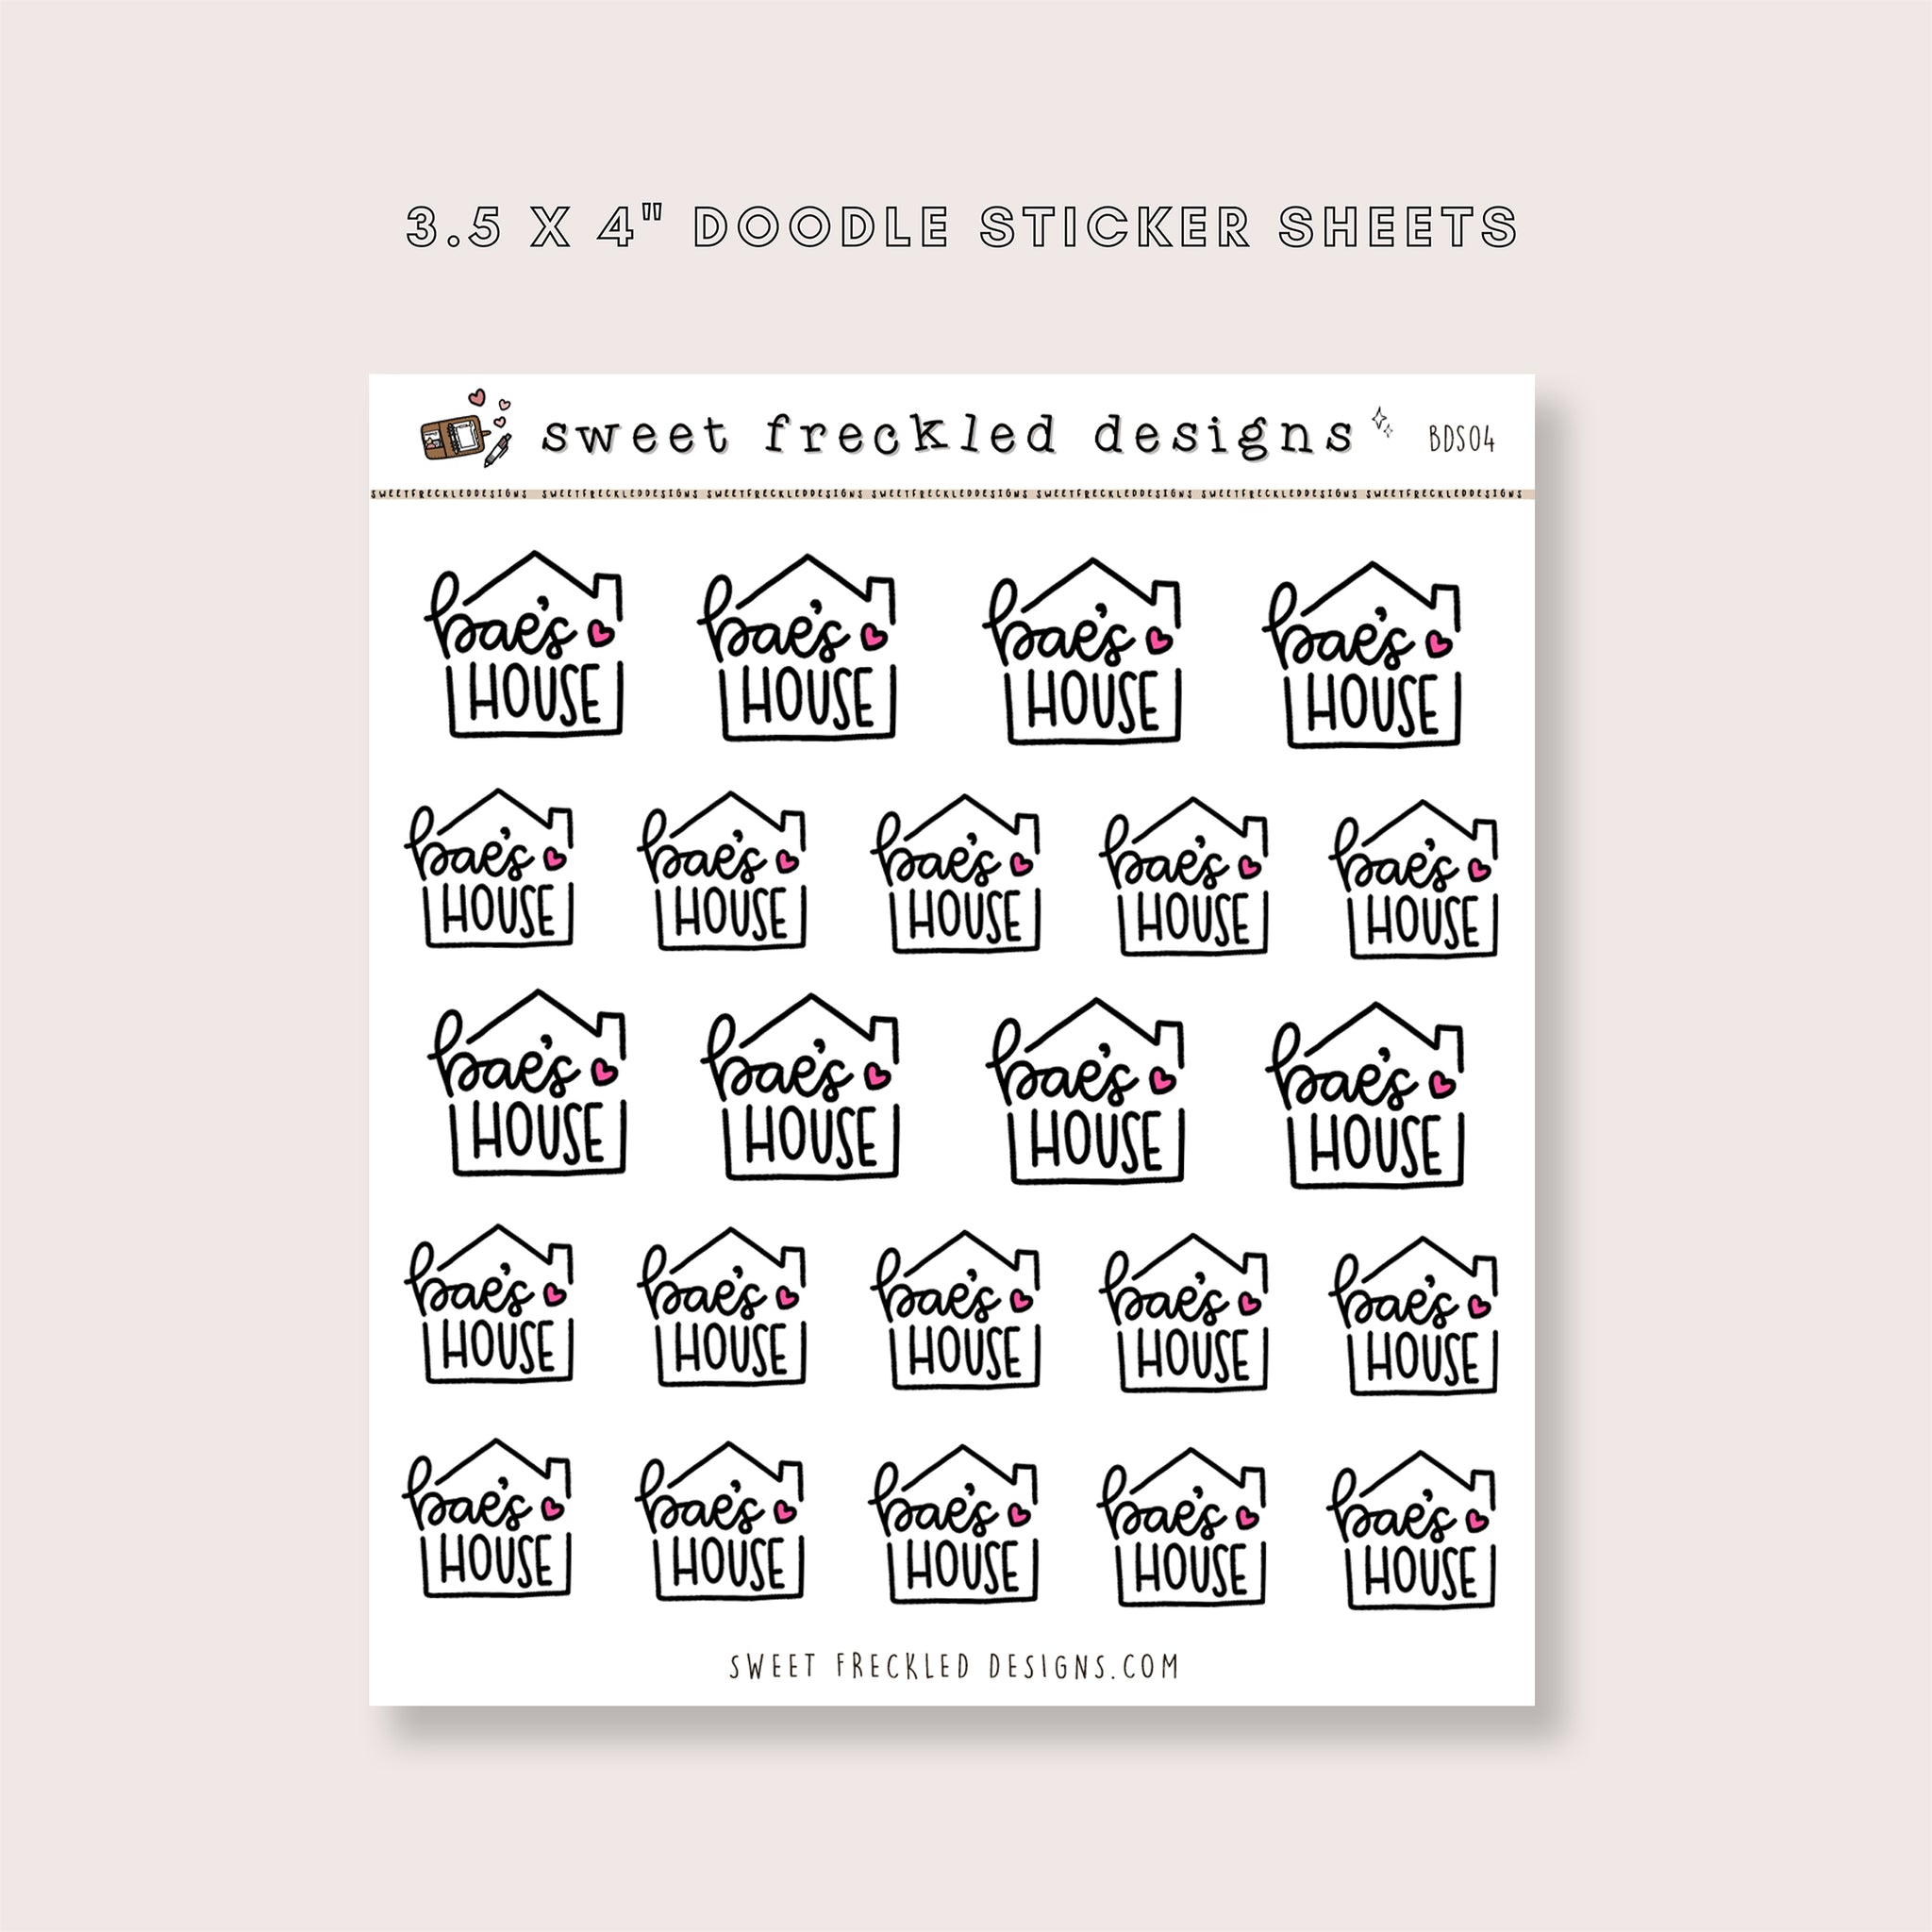 Bae's House Stickers